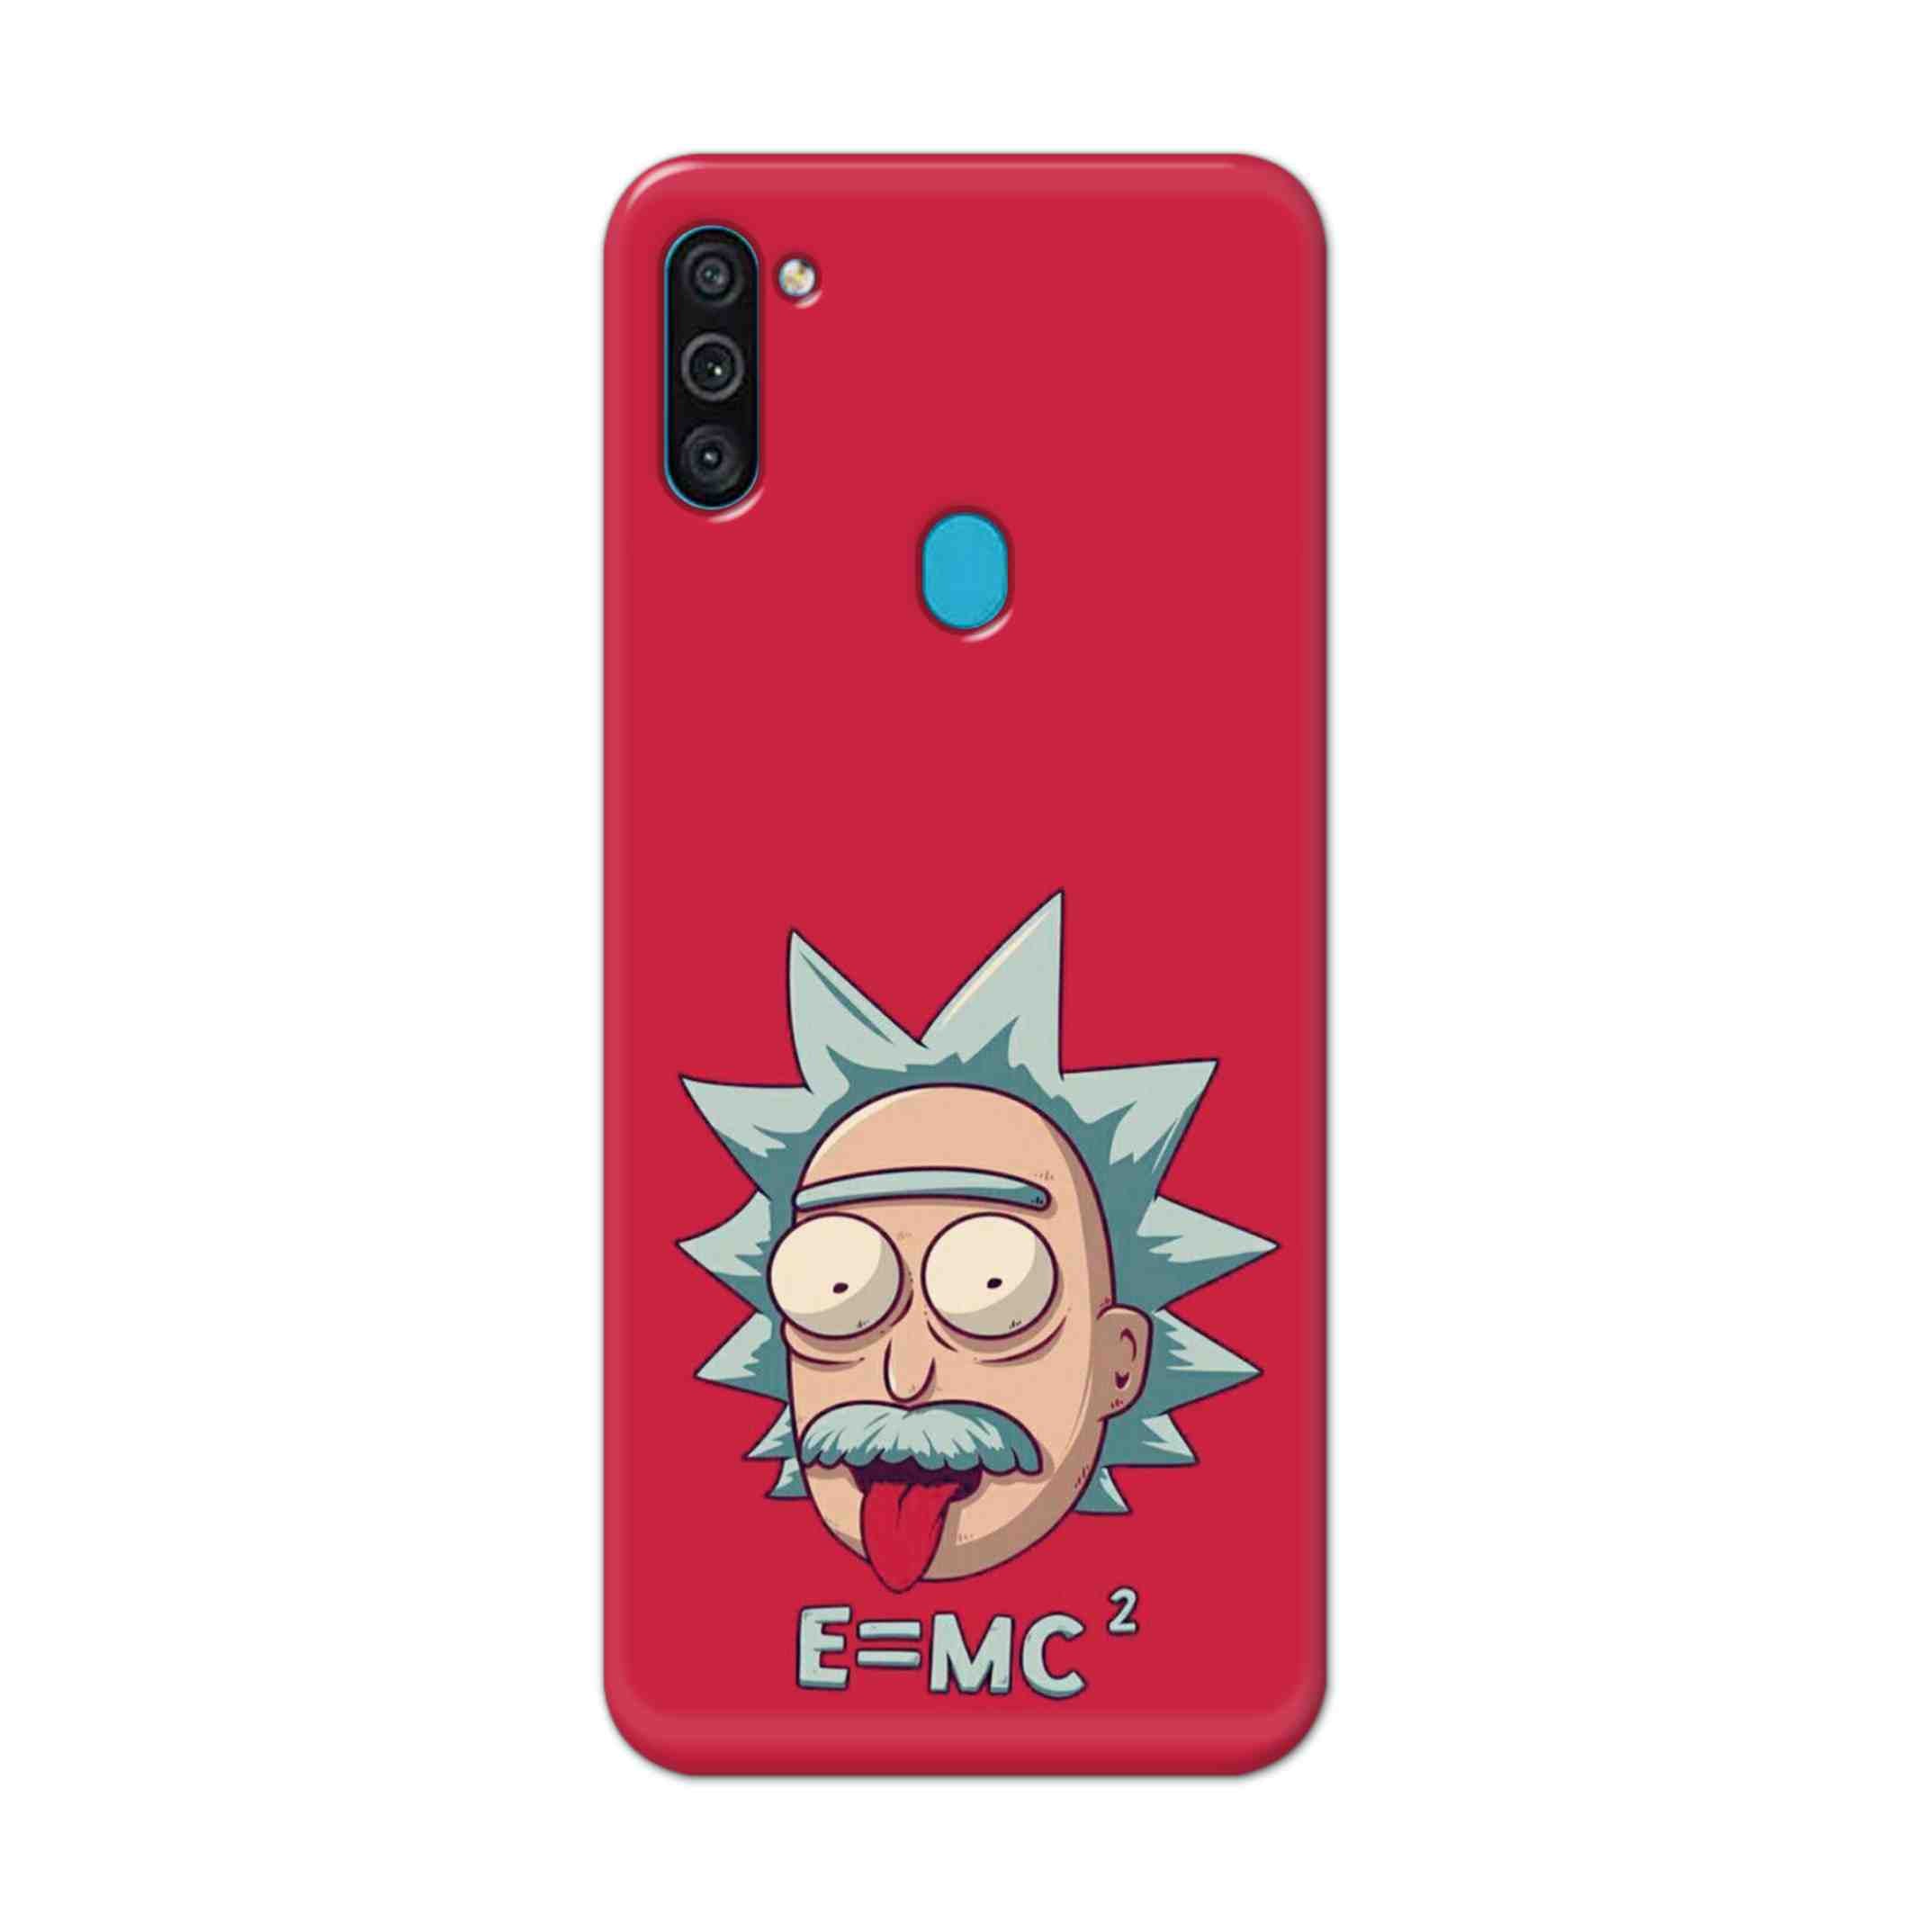 Buy E=Mc Hard Back Mobile Phone Case Cover For Samsung Galaxy M11 Online